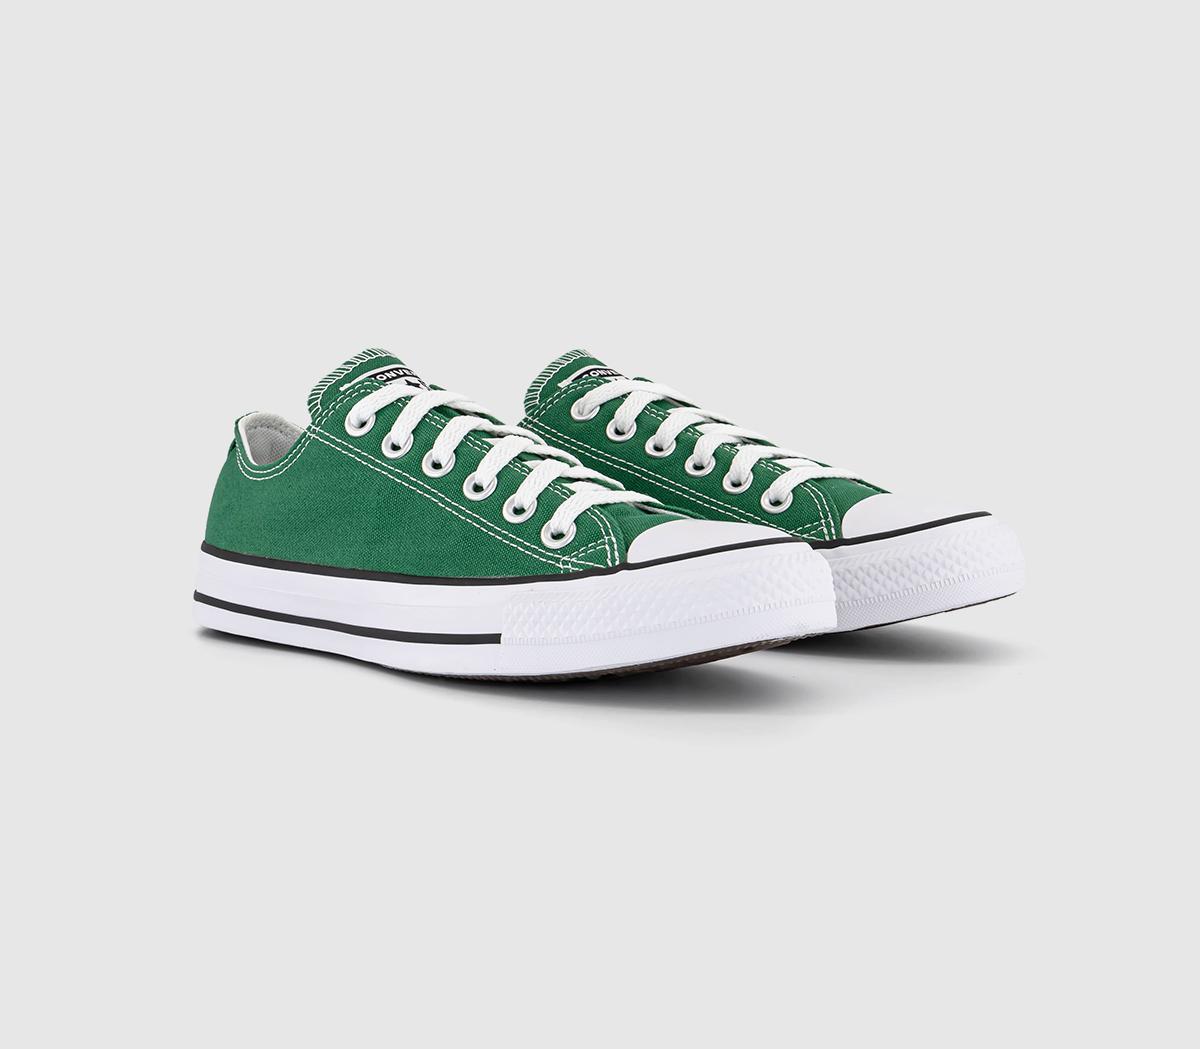 Converse All Star Low Trainers Amazon Green, 7